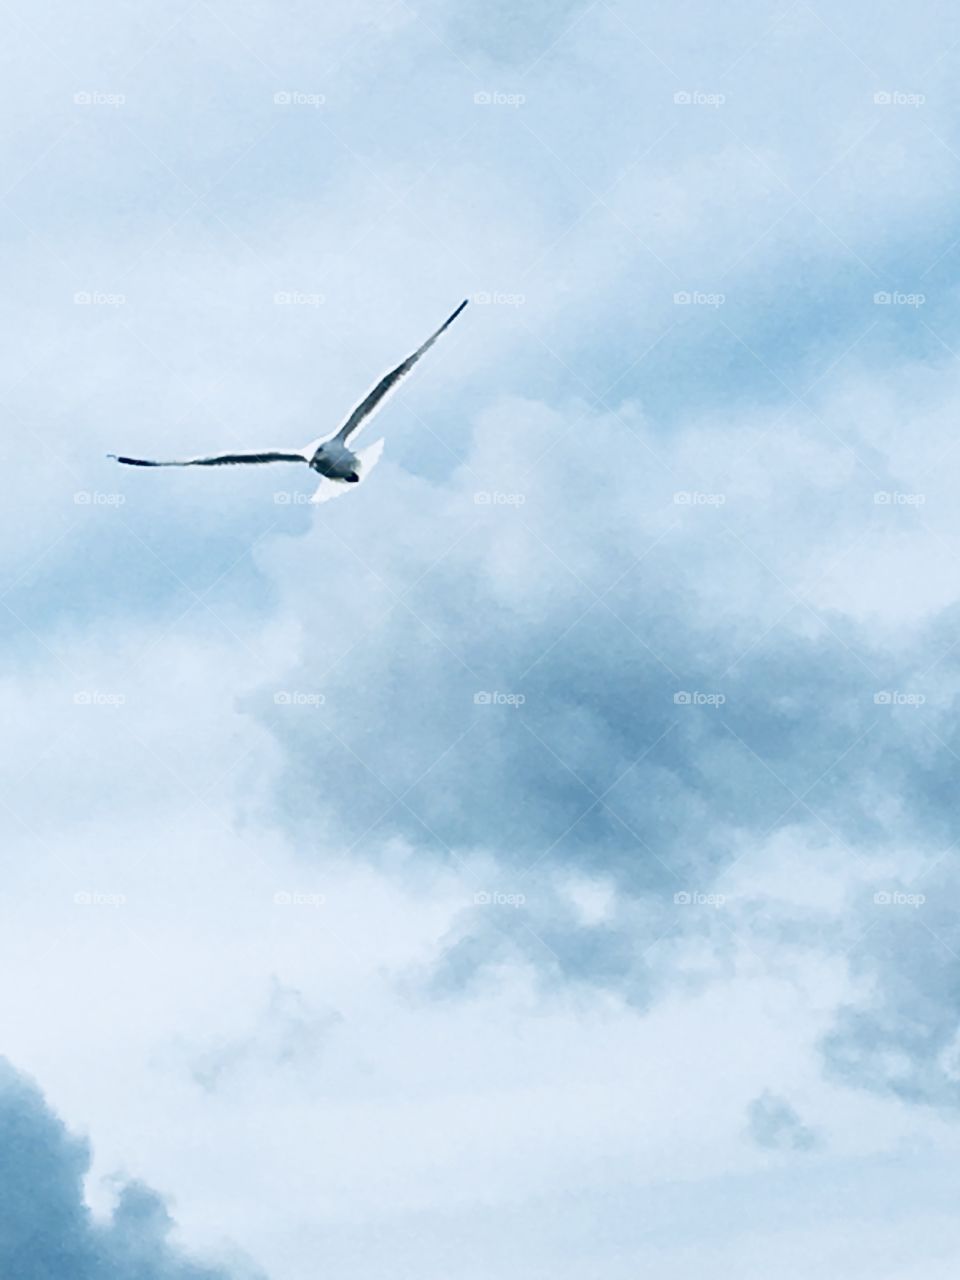 A seagull flying over our heads on the beach in cape cod Massachusetts 